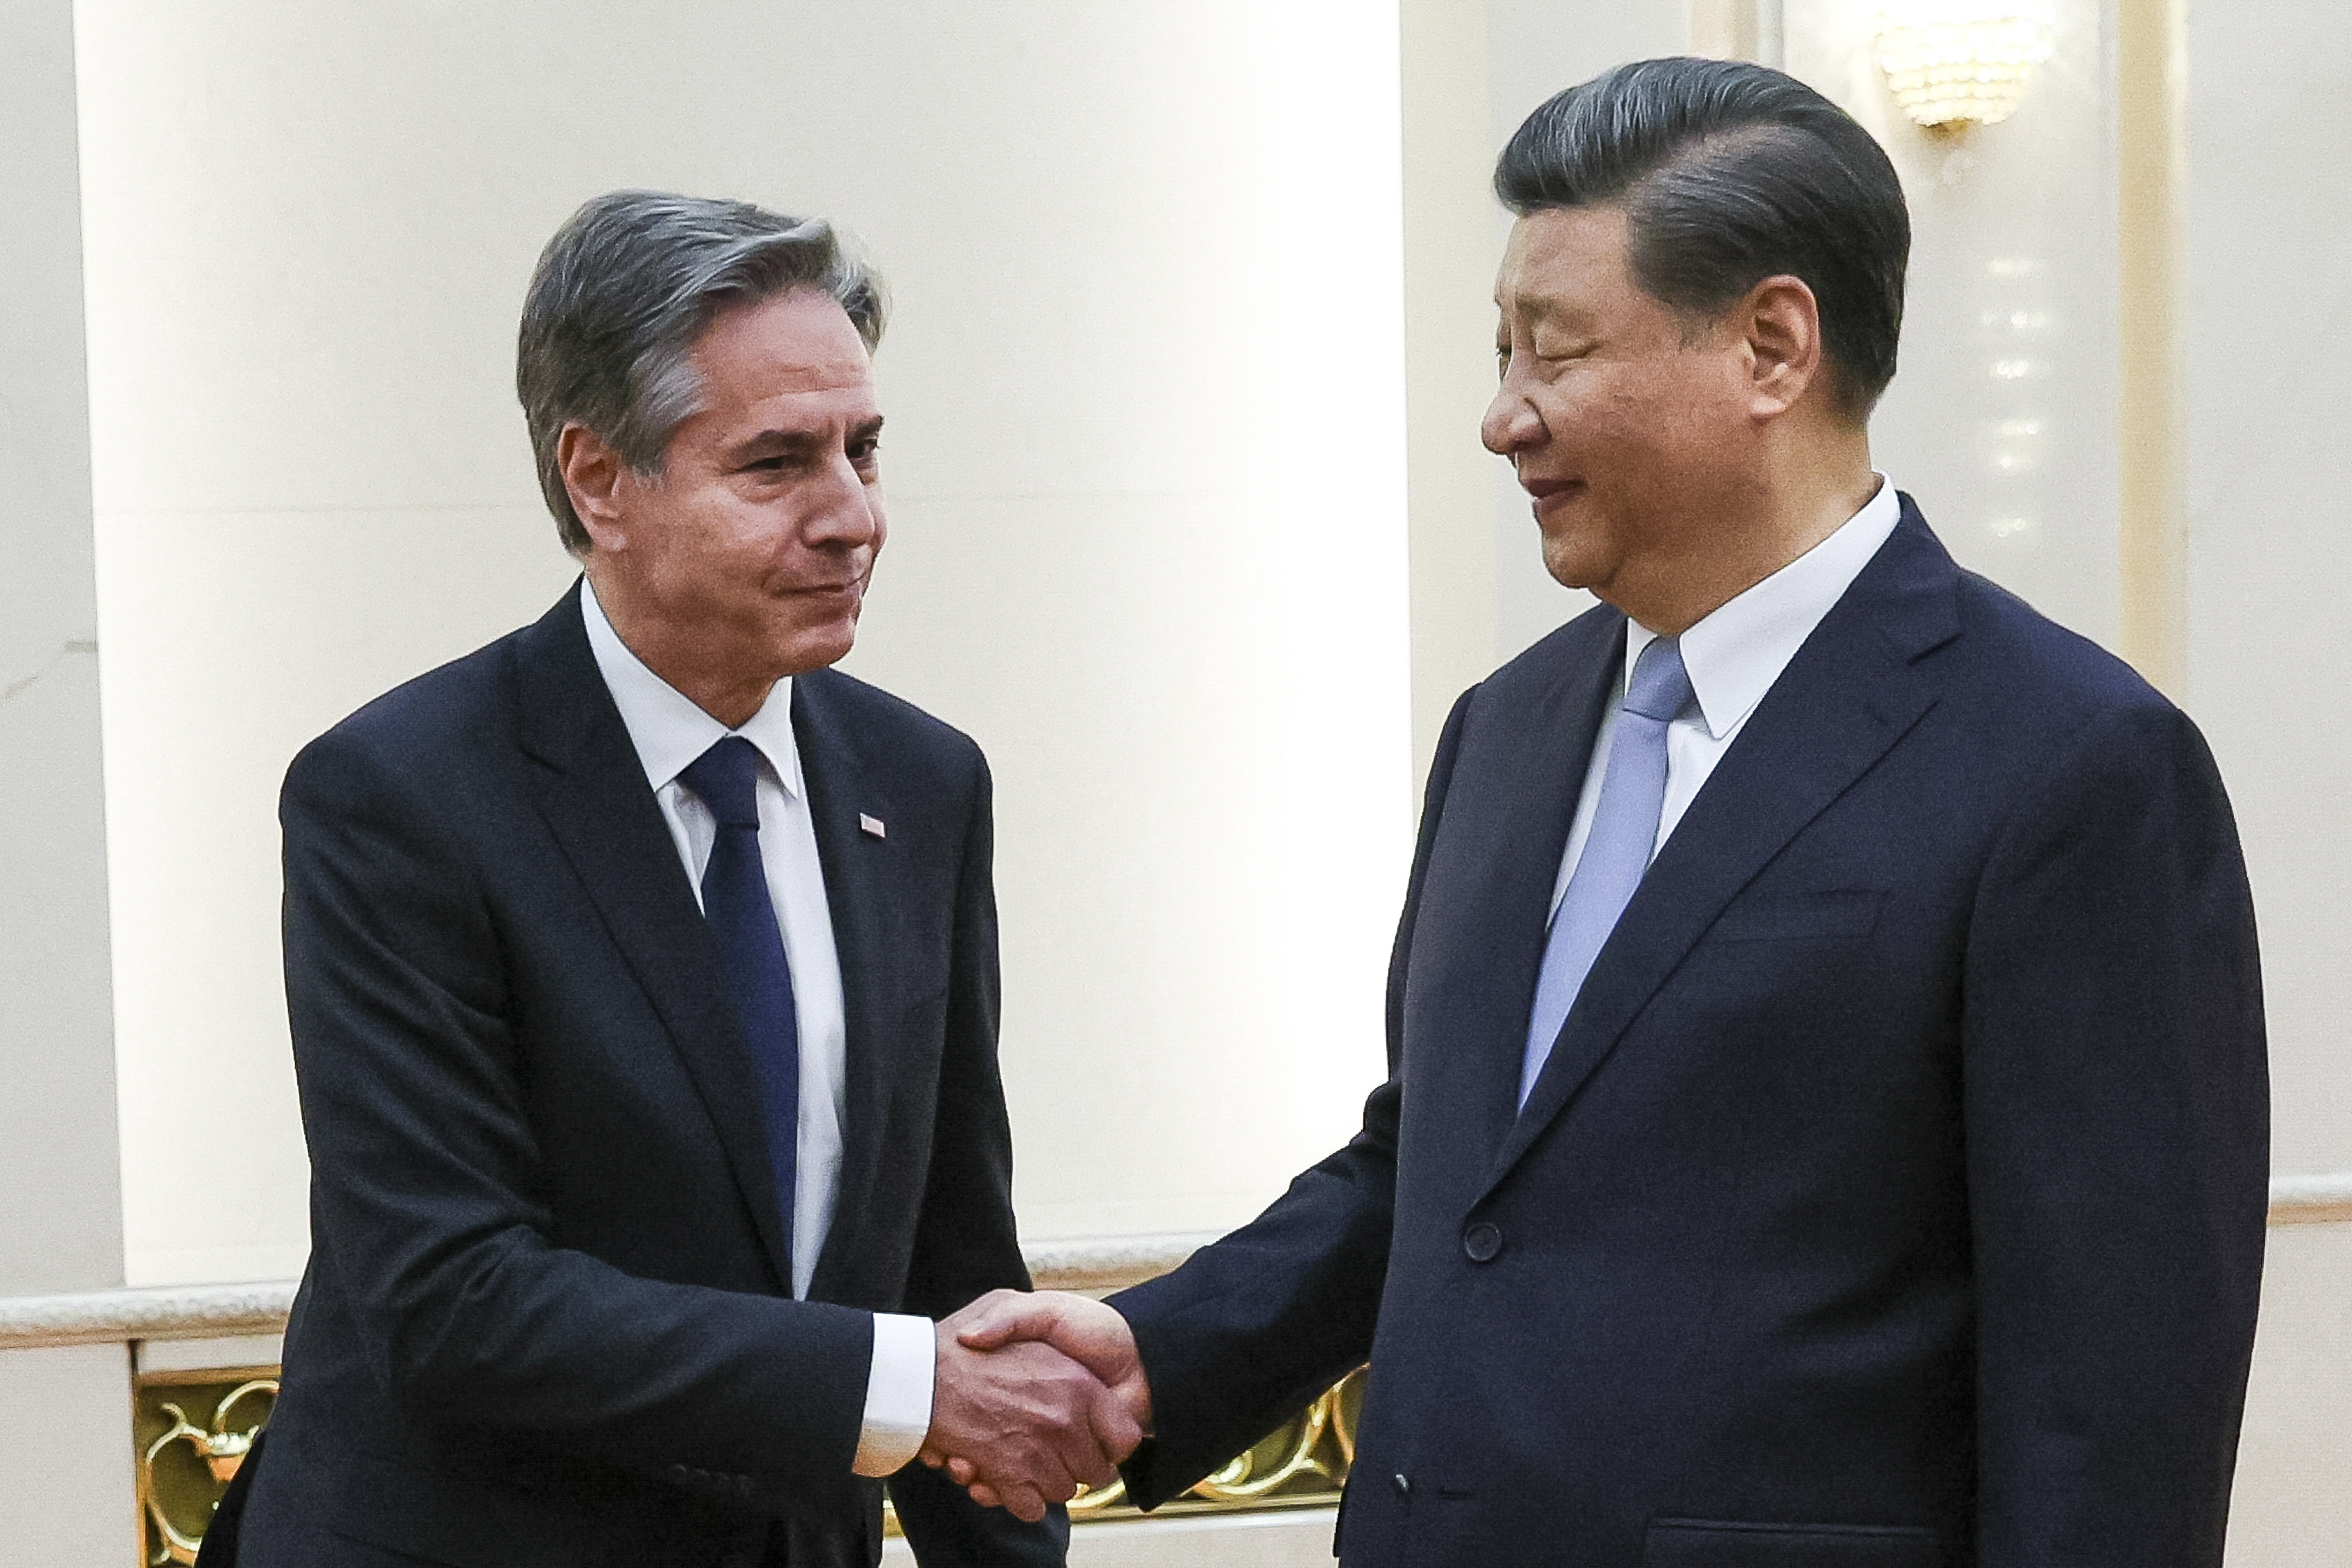 US Secretary of State Antony Blinken (left) shakes hands with Chinese President Xi Jinping (right) in the Great Hall of the People in Beijing on Monday. Photo: AP